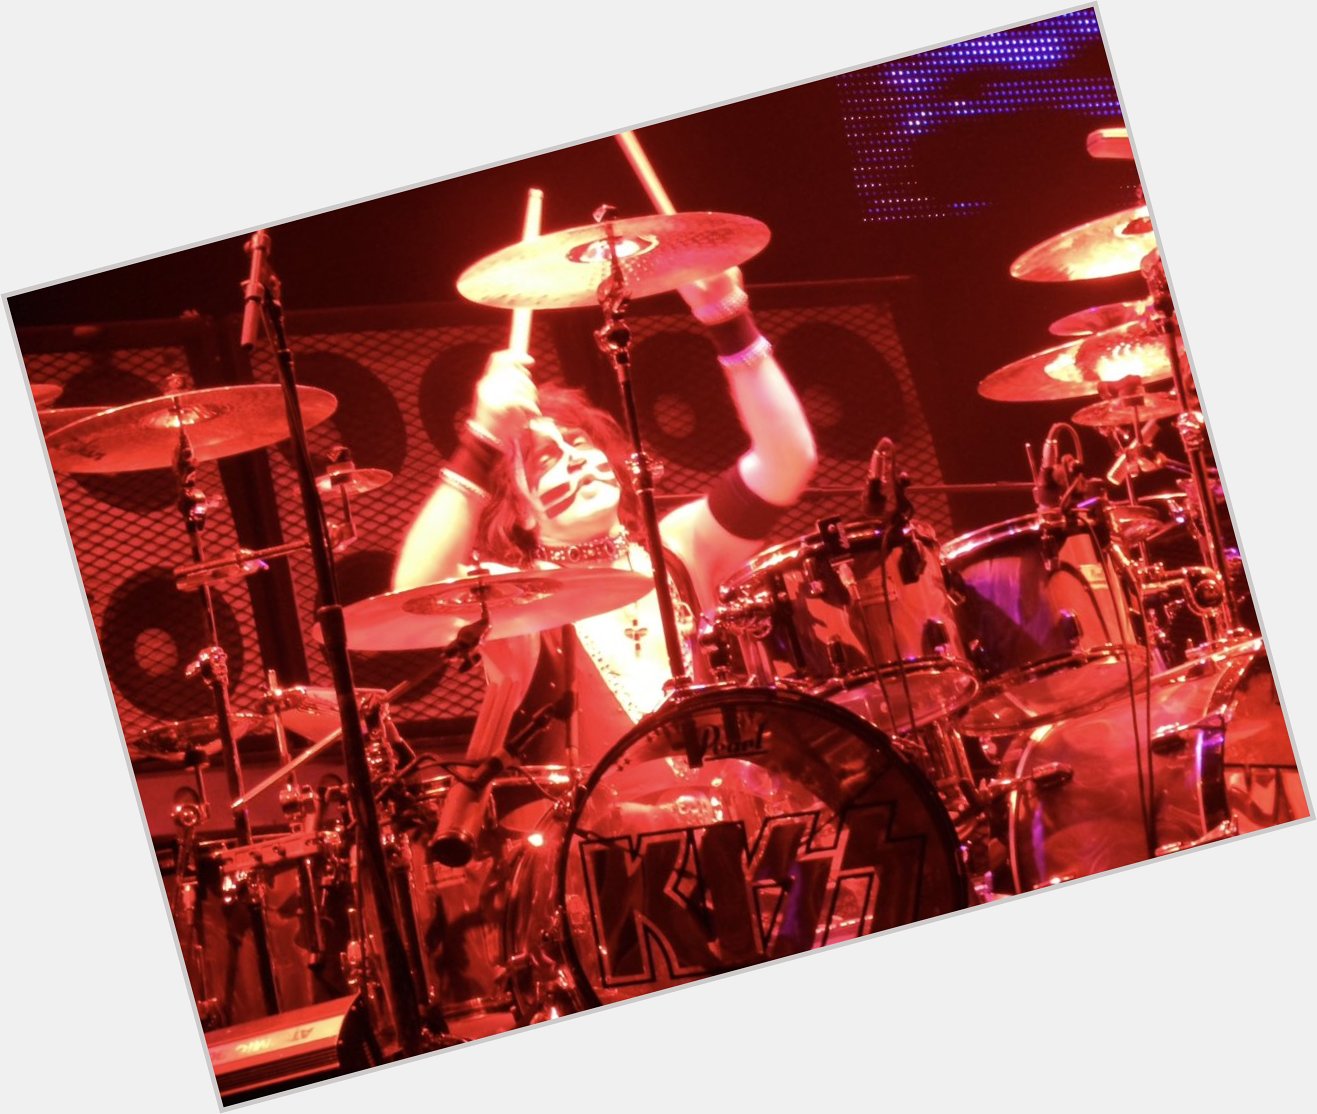  Happy Birthday Eric Singer! 
Here s a photograph I took at a KISS show in 2011. Have a rockin good Birthday! 